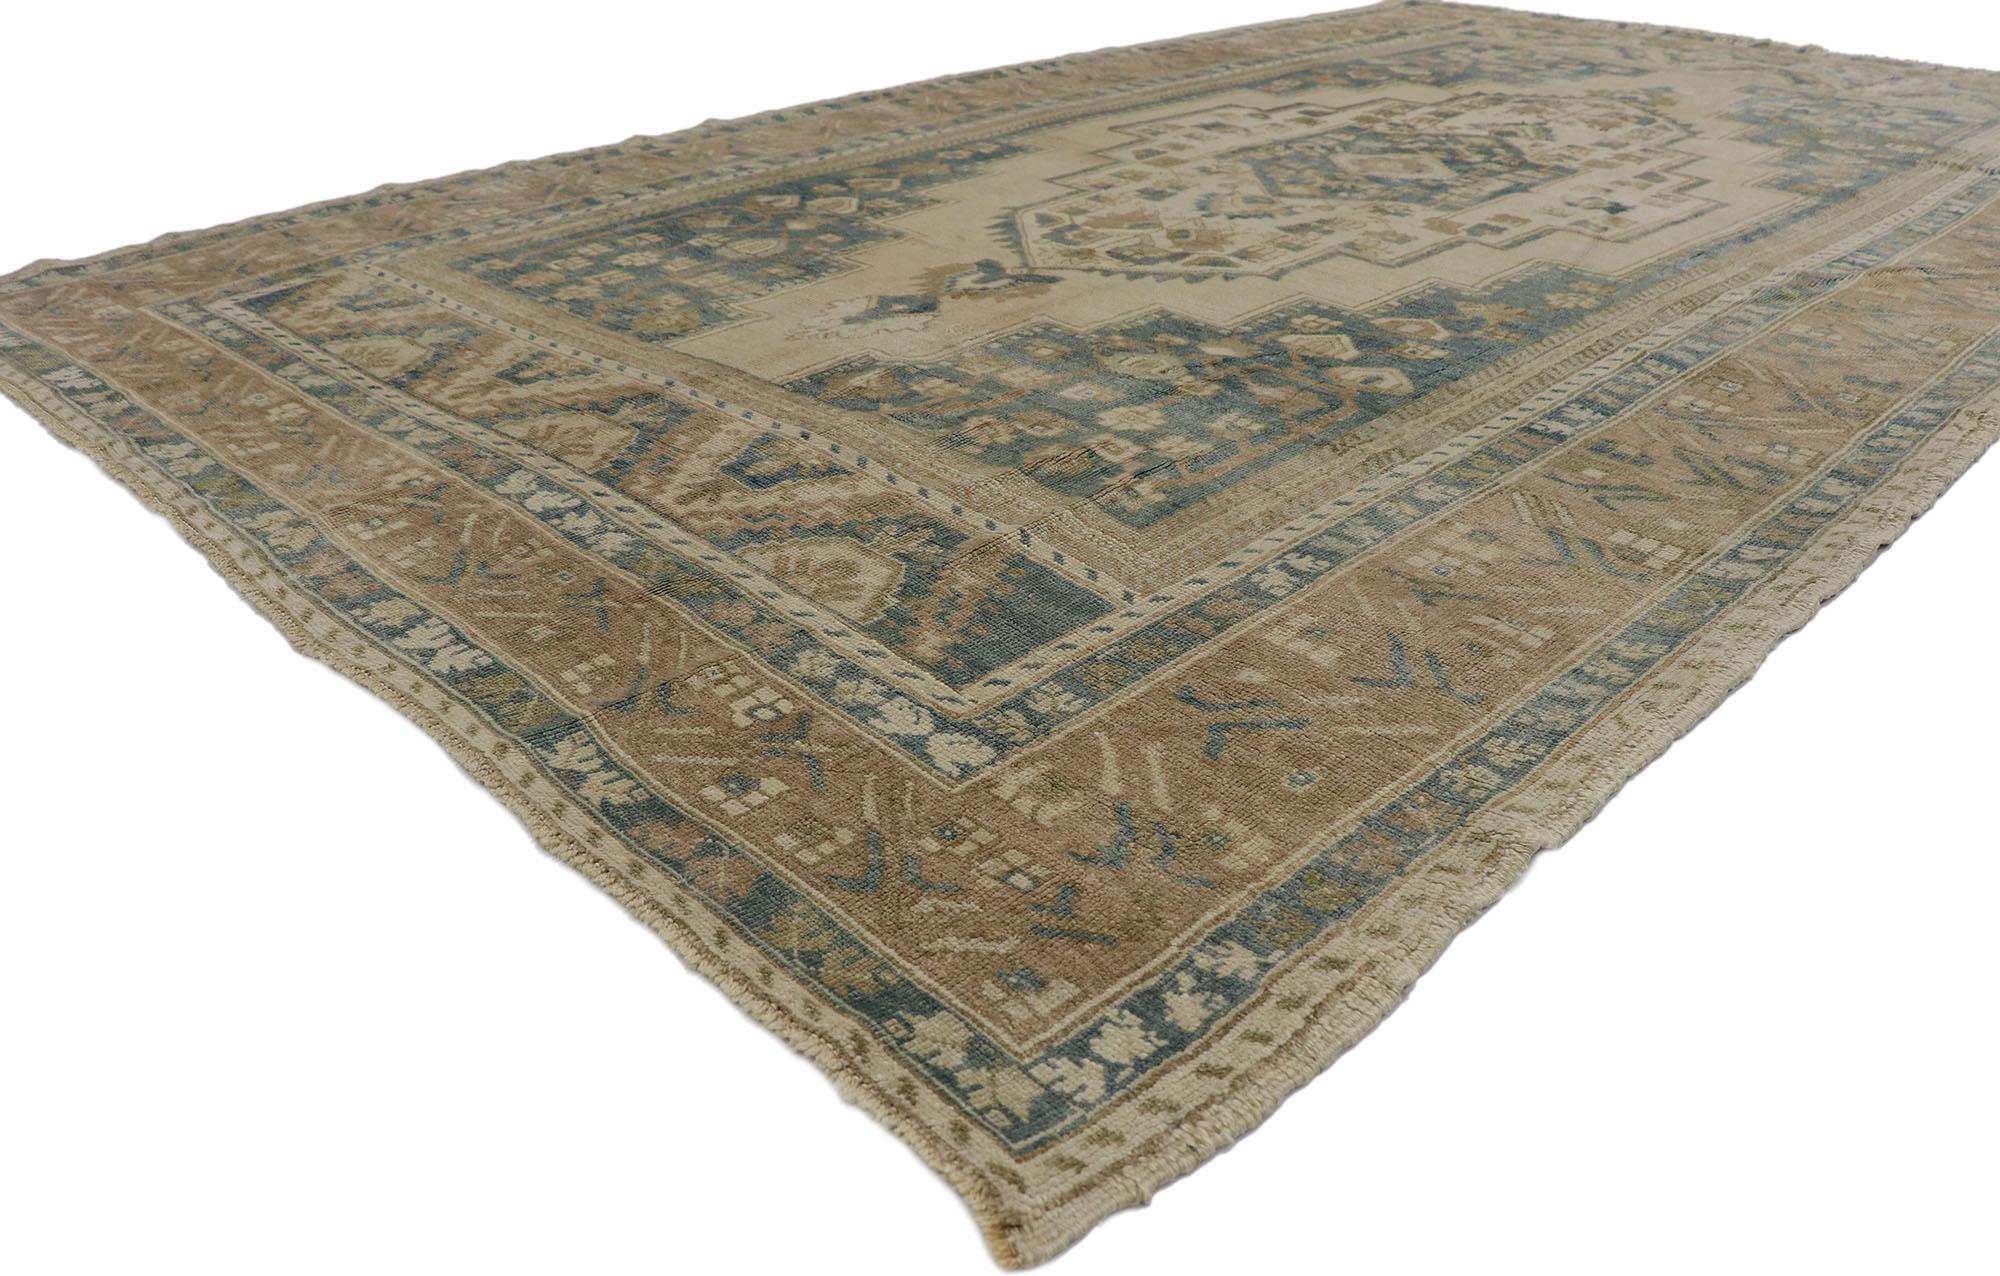 53621 Vintage Turkish Oushak rug 06'08 x 11'02. Effortless beauty and simplicity meet soft, bespoke vibes with Mid-Century Modern style in this hand-knotted wool vintage Turkish Oushak rug. The antique washed cut-out field features a stepped